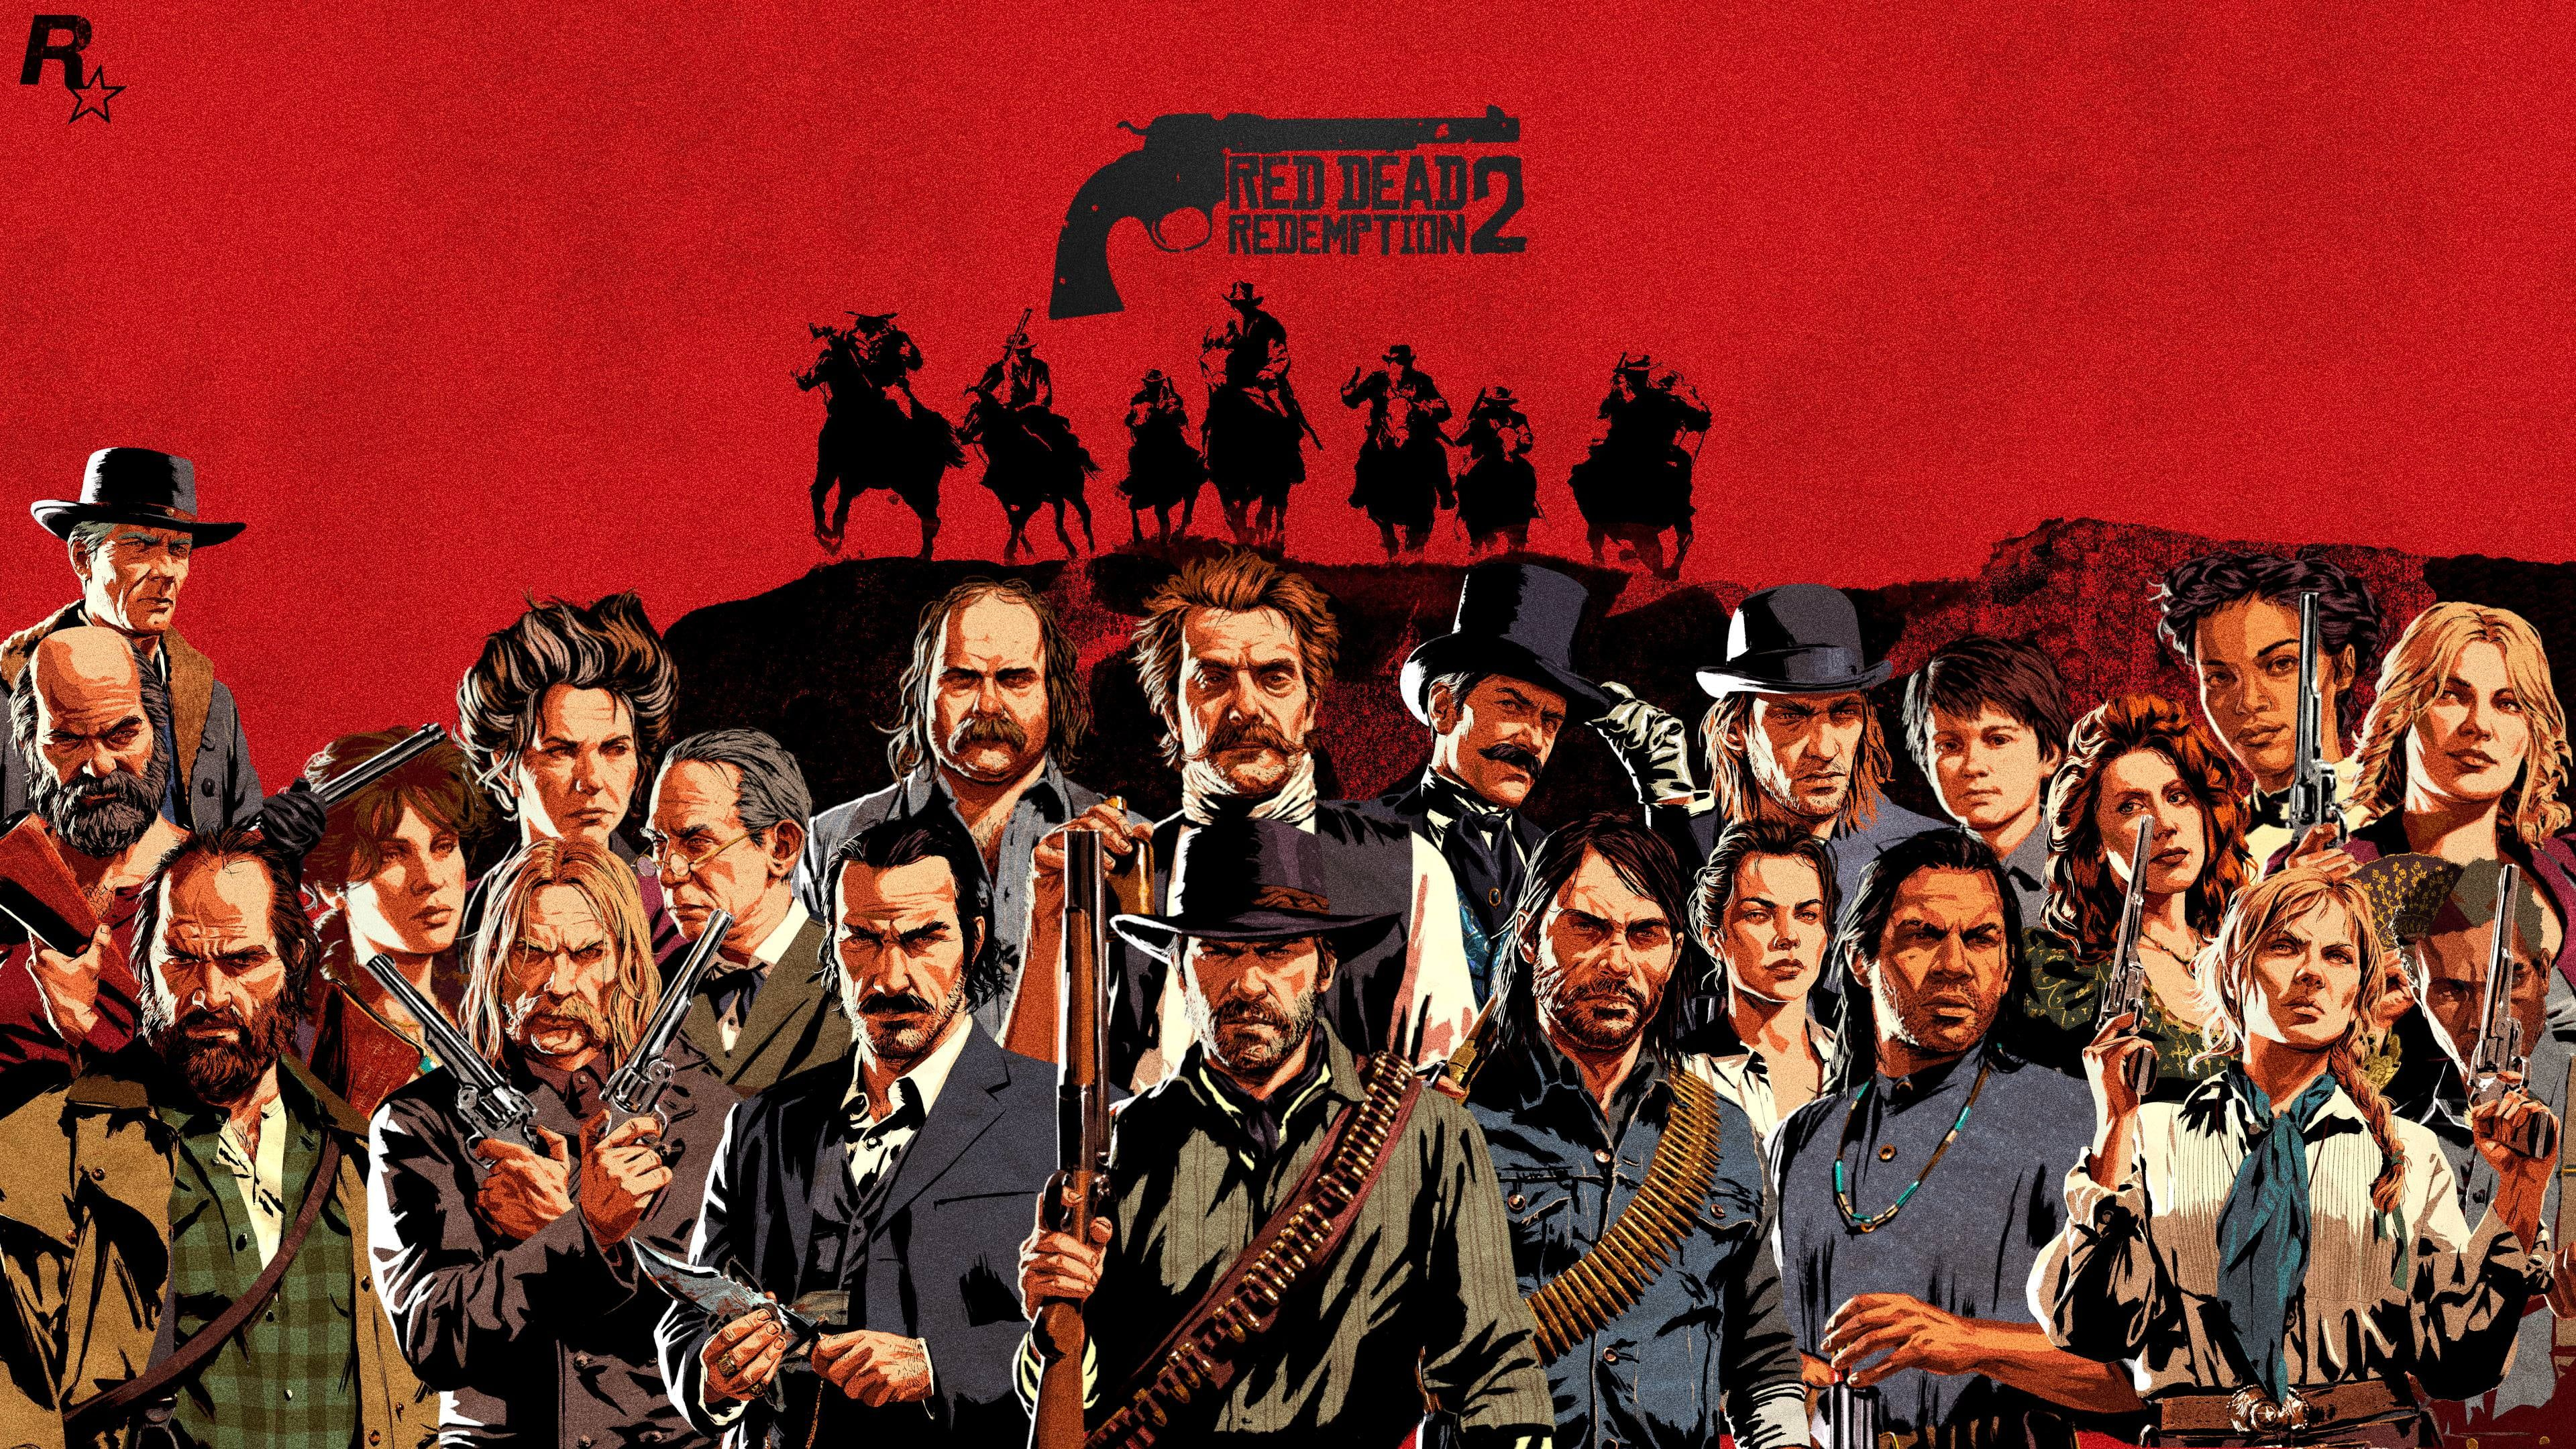 3840x2160 Pin on Red dead